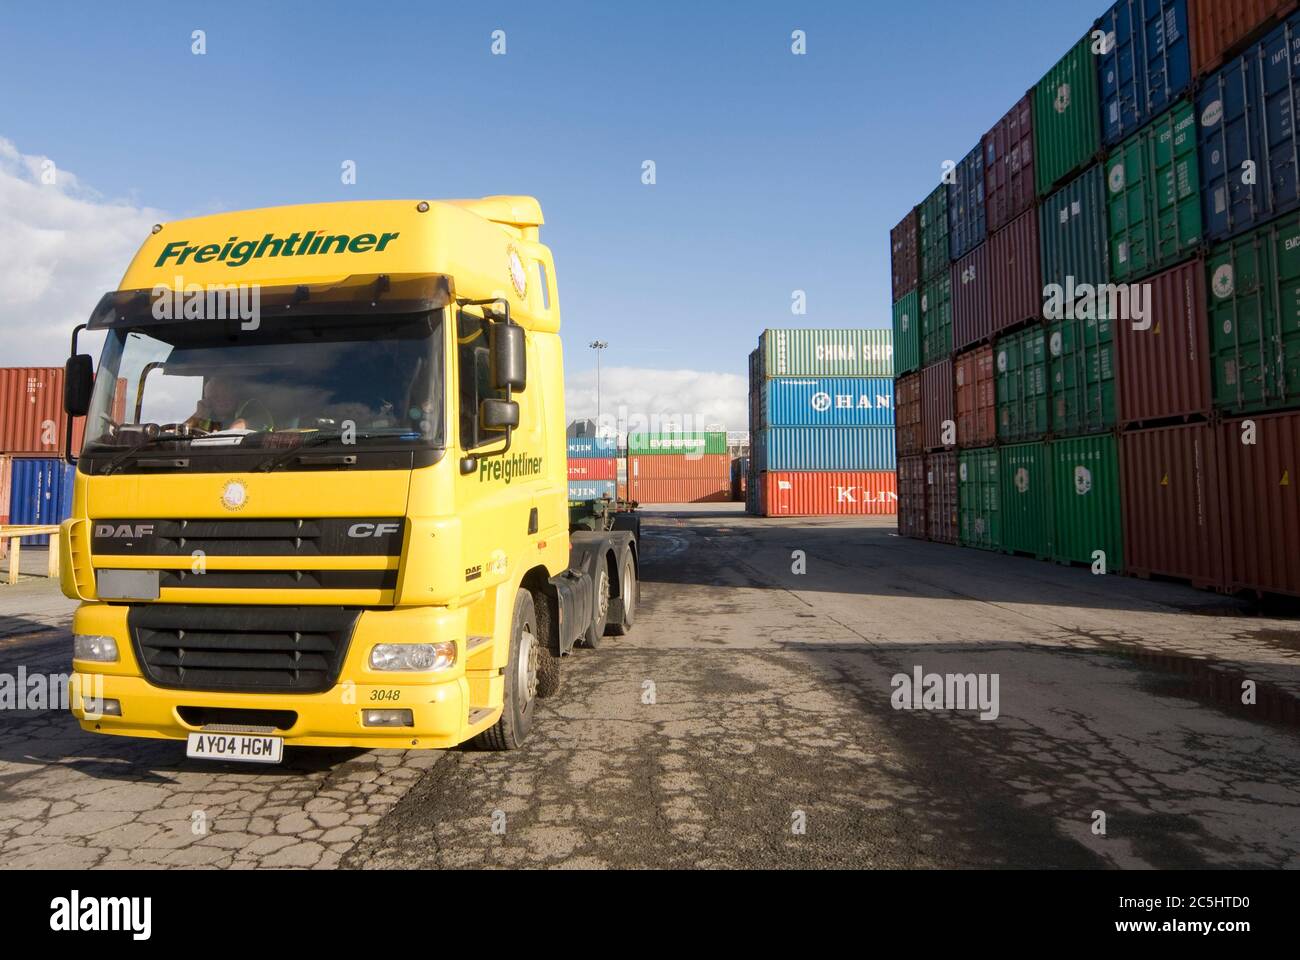 Freightliner lorry at Manchester Euroterminal, Trafford Park, Manchester, England. Stock Photo